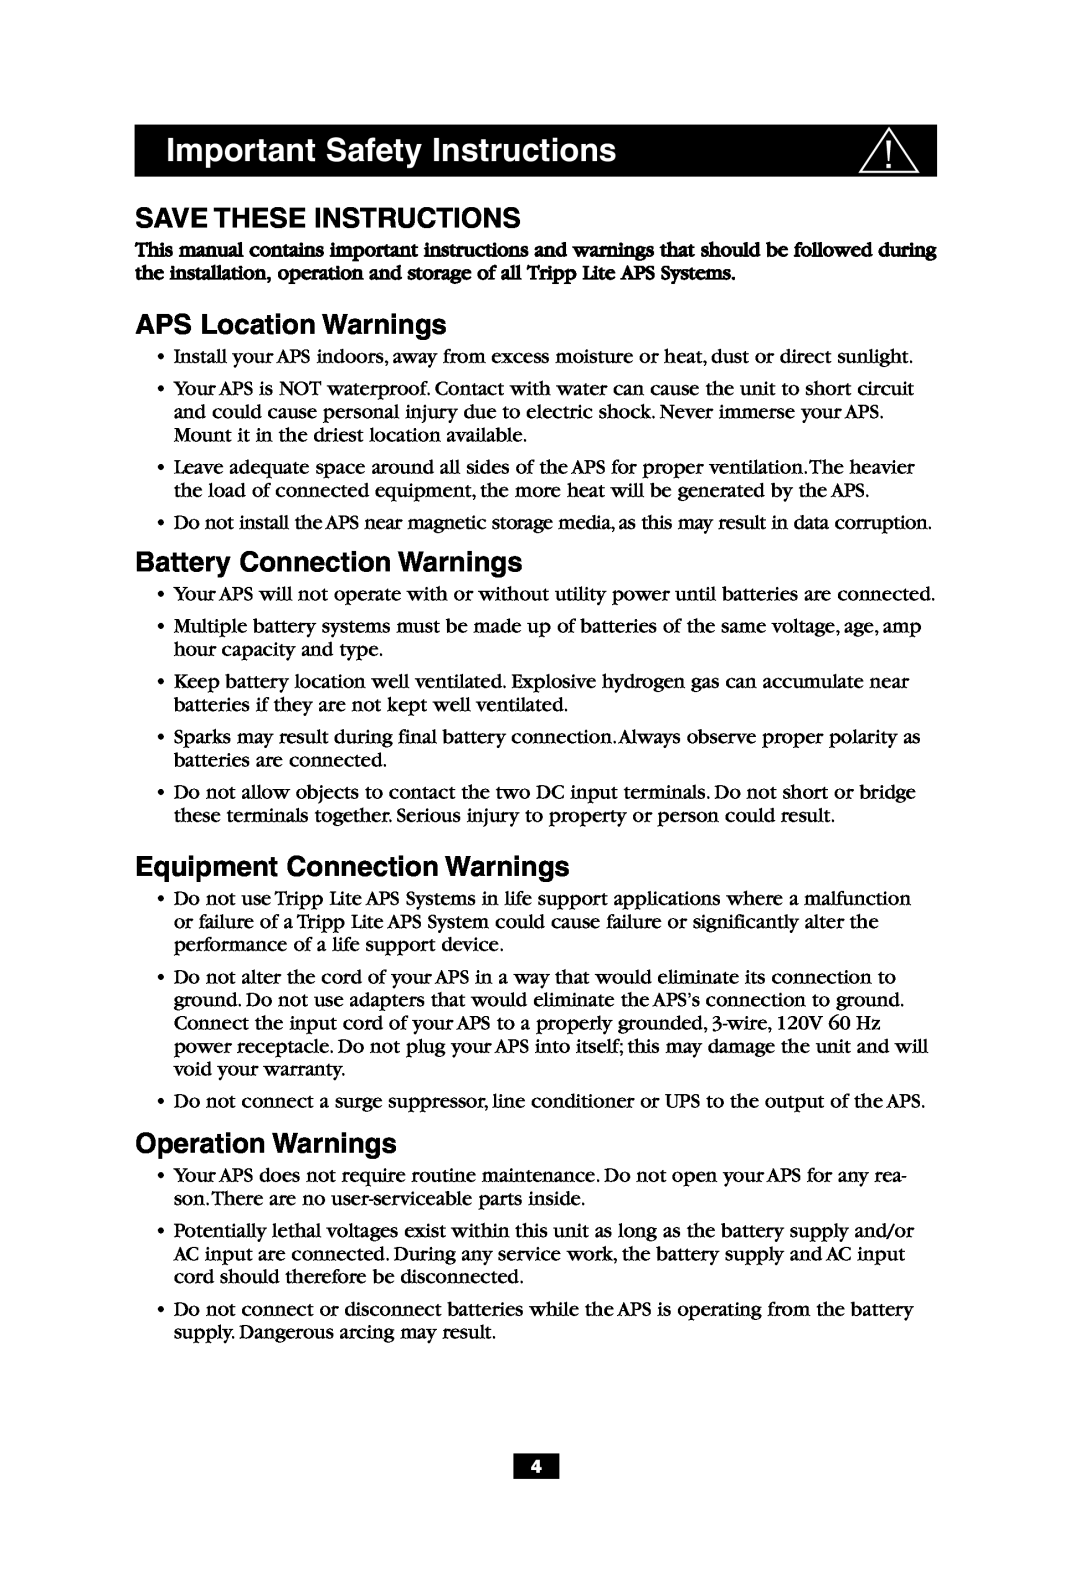 Tripp Lite APS 612 Save These Instructions, APS Location Warnings, Battery Connection Warnings, Operation Warnings 